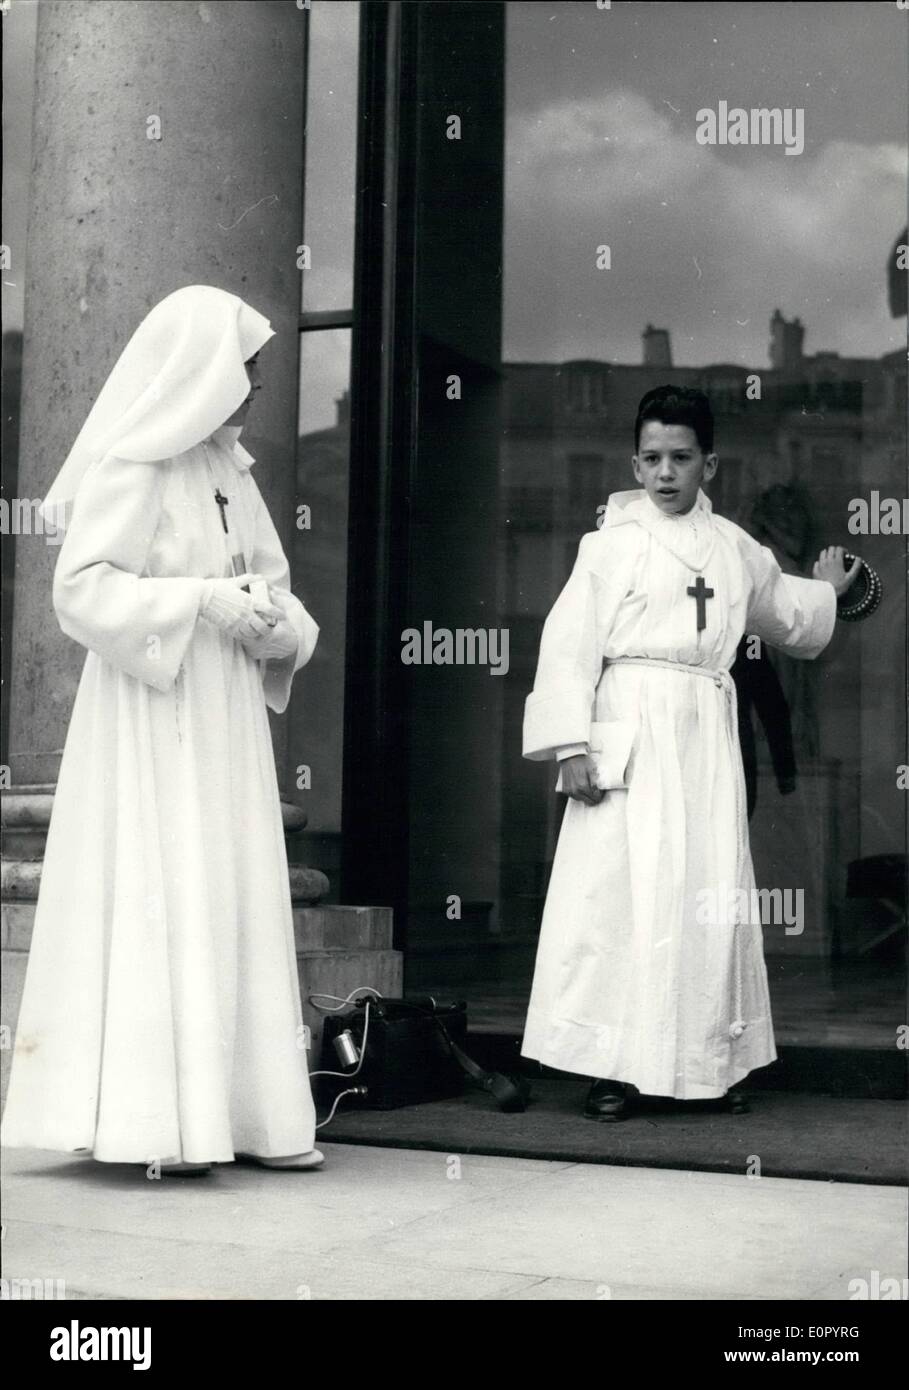 May 05, 1957 - All's not black at Elysee palace: Press photographers who have been on duty at Elysee Palace ever since the crisis started were delighted to see these two 'white apparitions'. The boy and the girl wearing white robes are the children of Captain Schmidt, member of the Presidential Military House. They just came from the Church where they had their first communion. A real boon of cameramen. Stock Photo